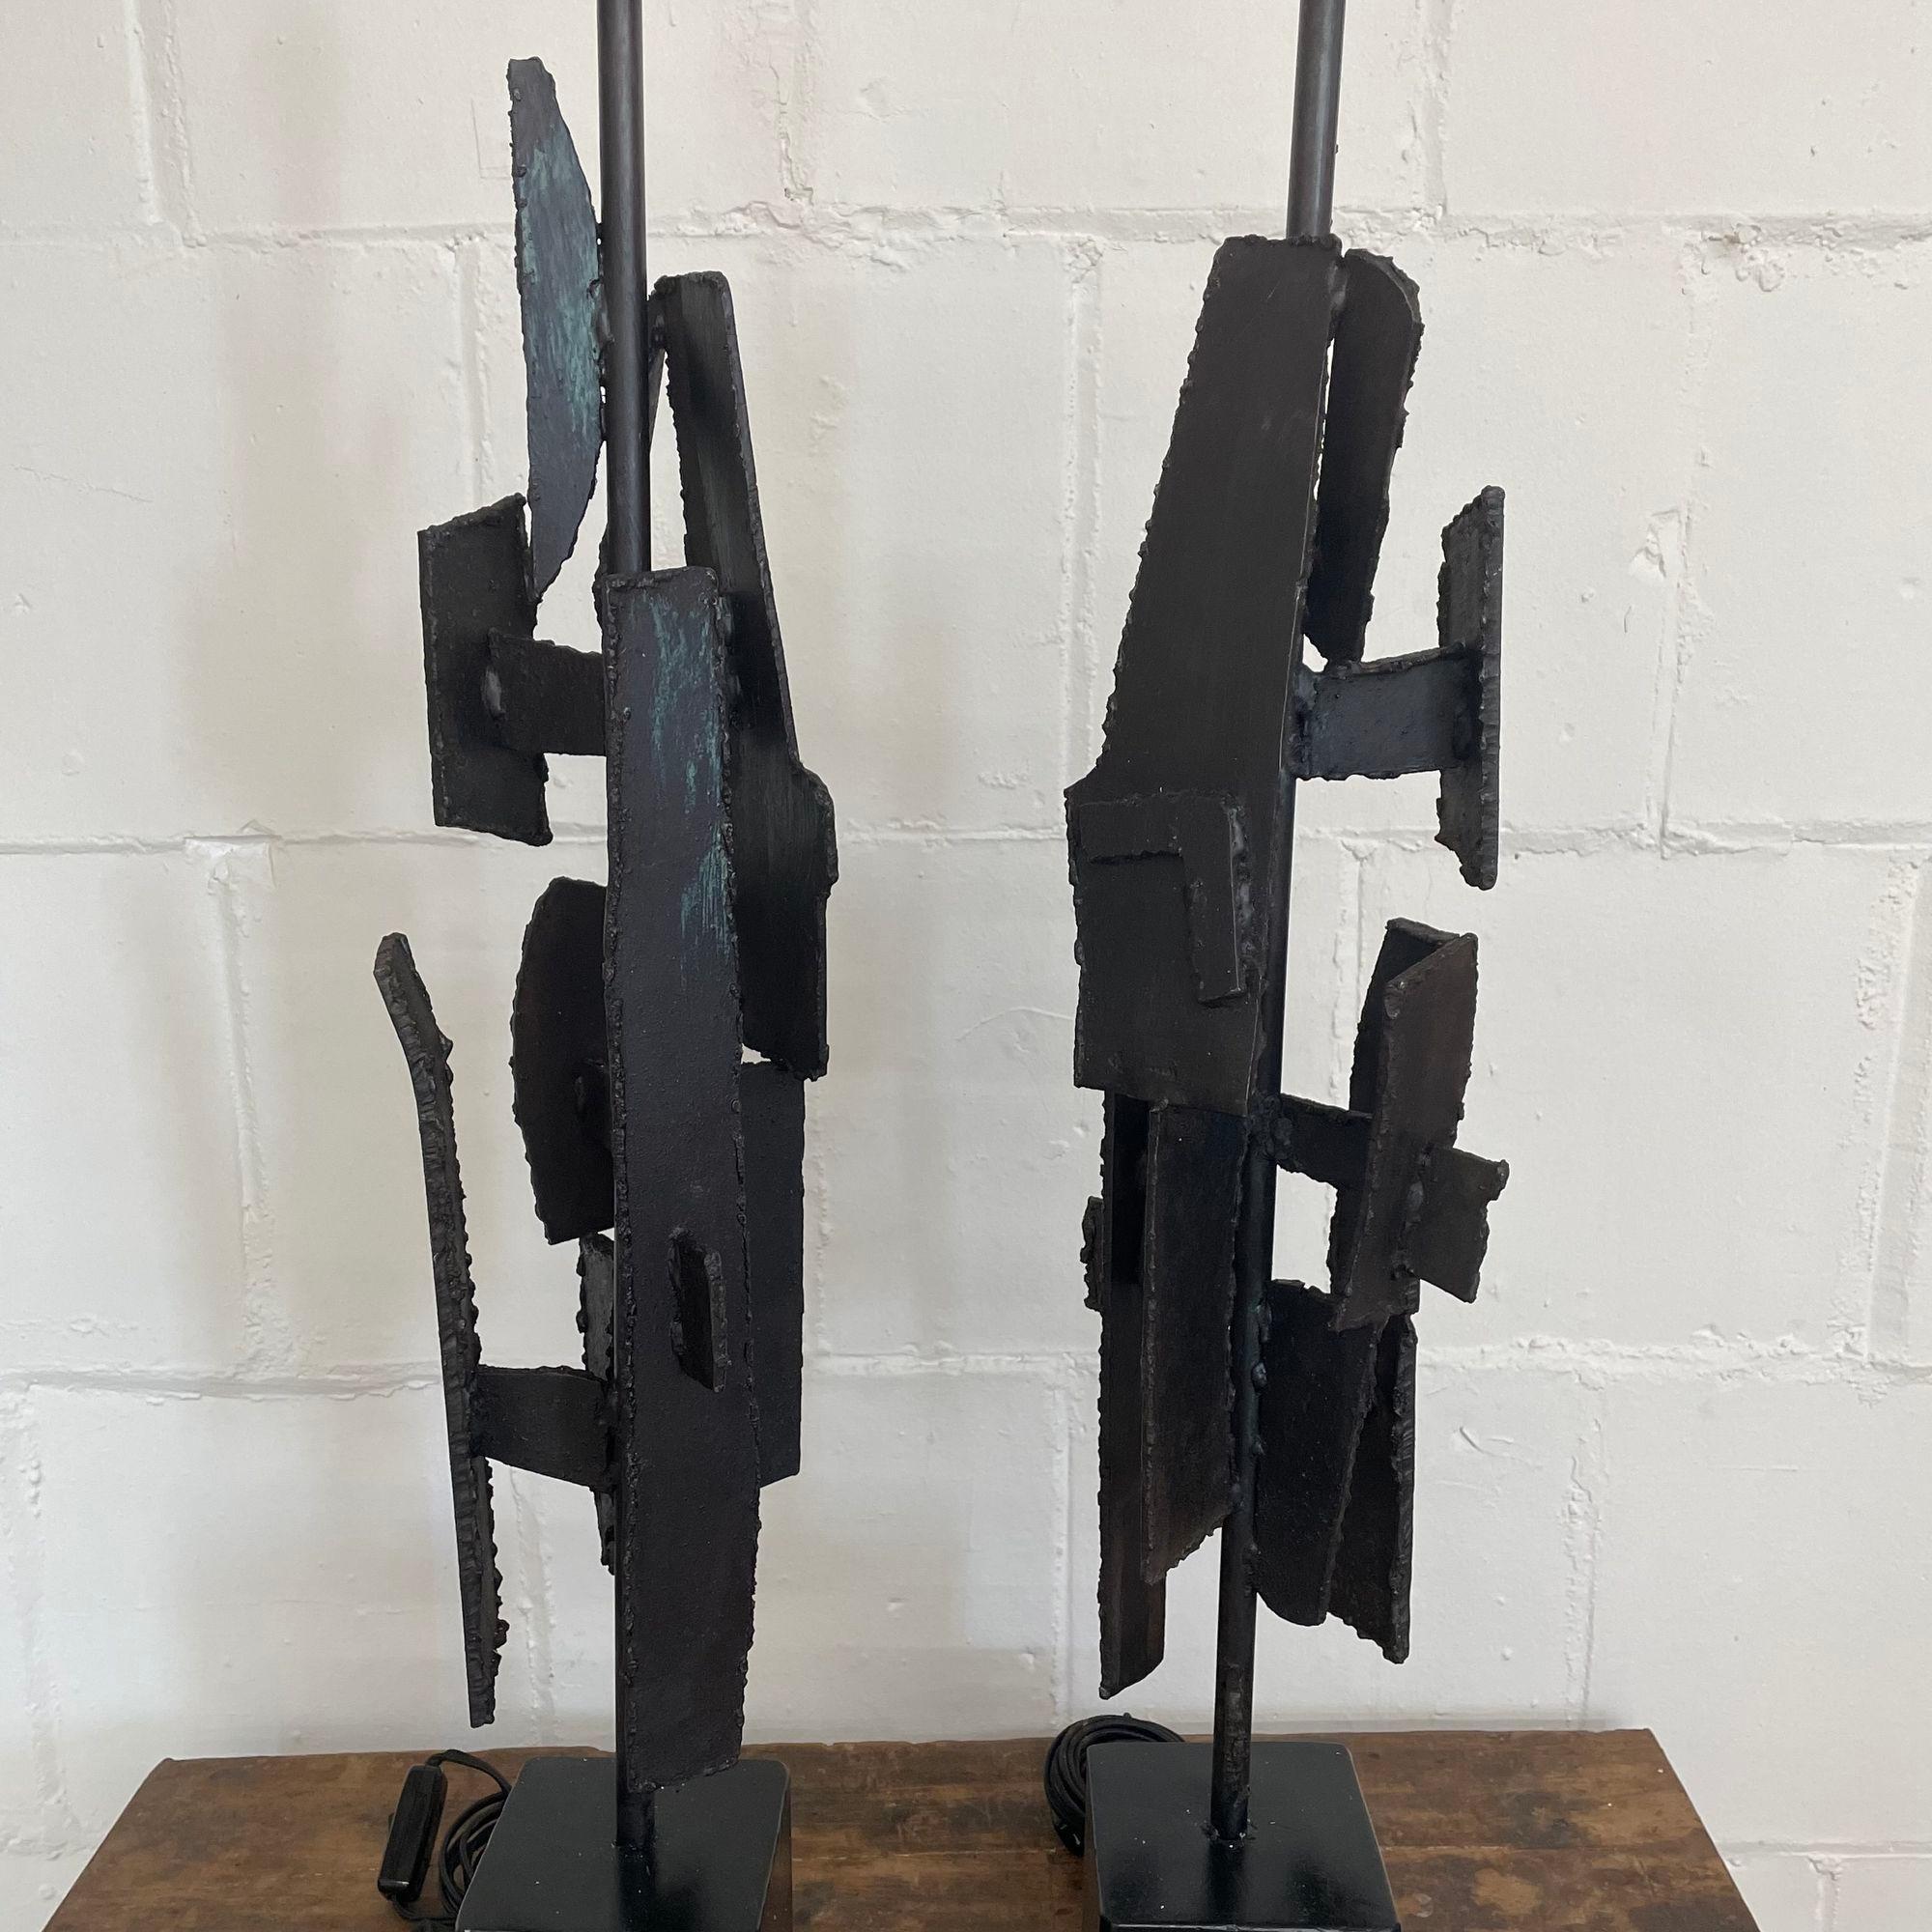 Pair of Wrought Iron Brutalist Style Mid-Century Modern Table Lamps, Evans Style In Good Condition For Sale In Stamford, CT